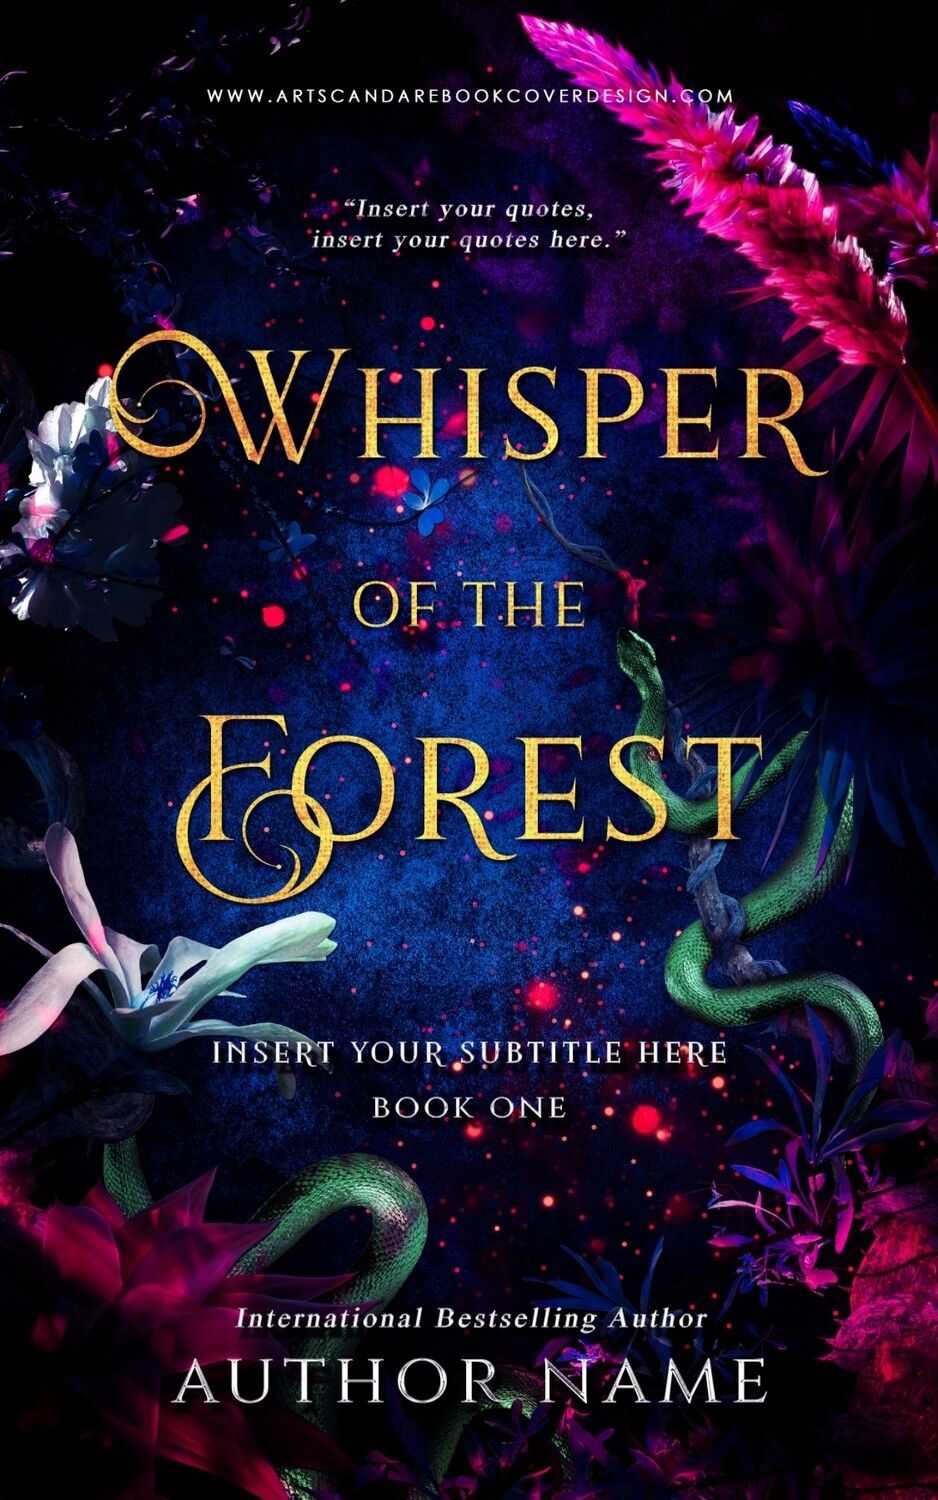 Ebook: Whisper of the Forest